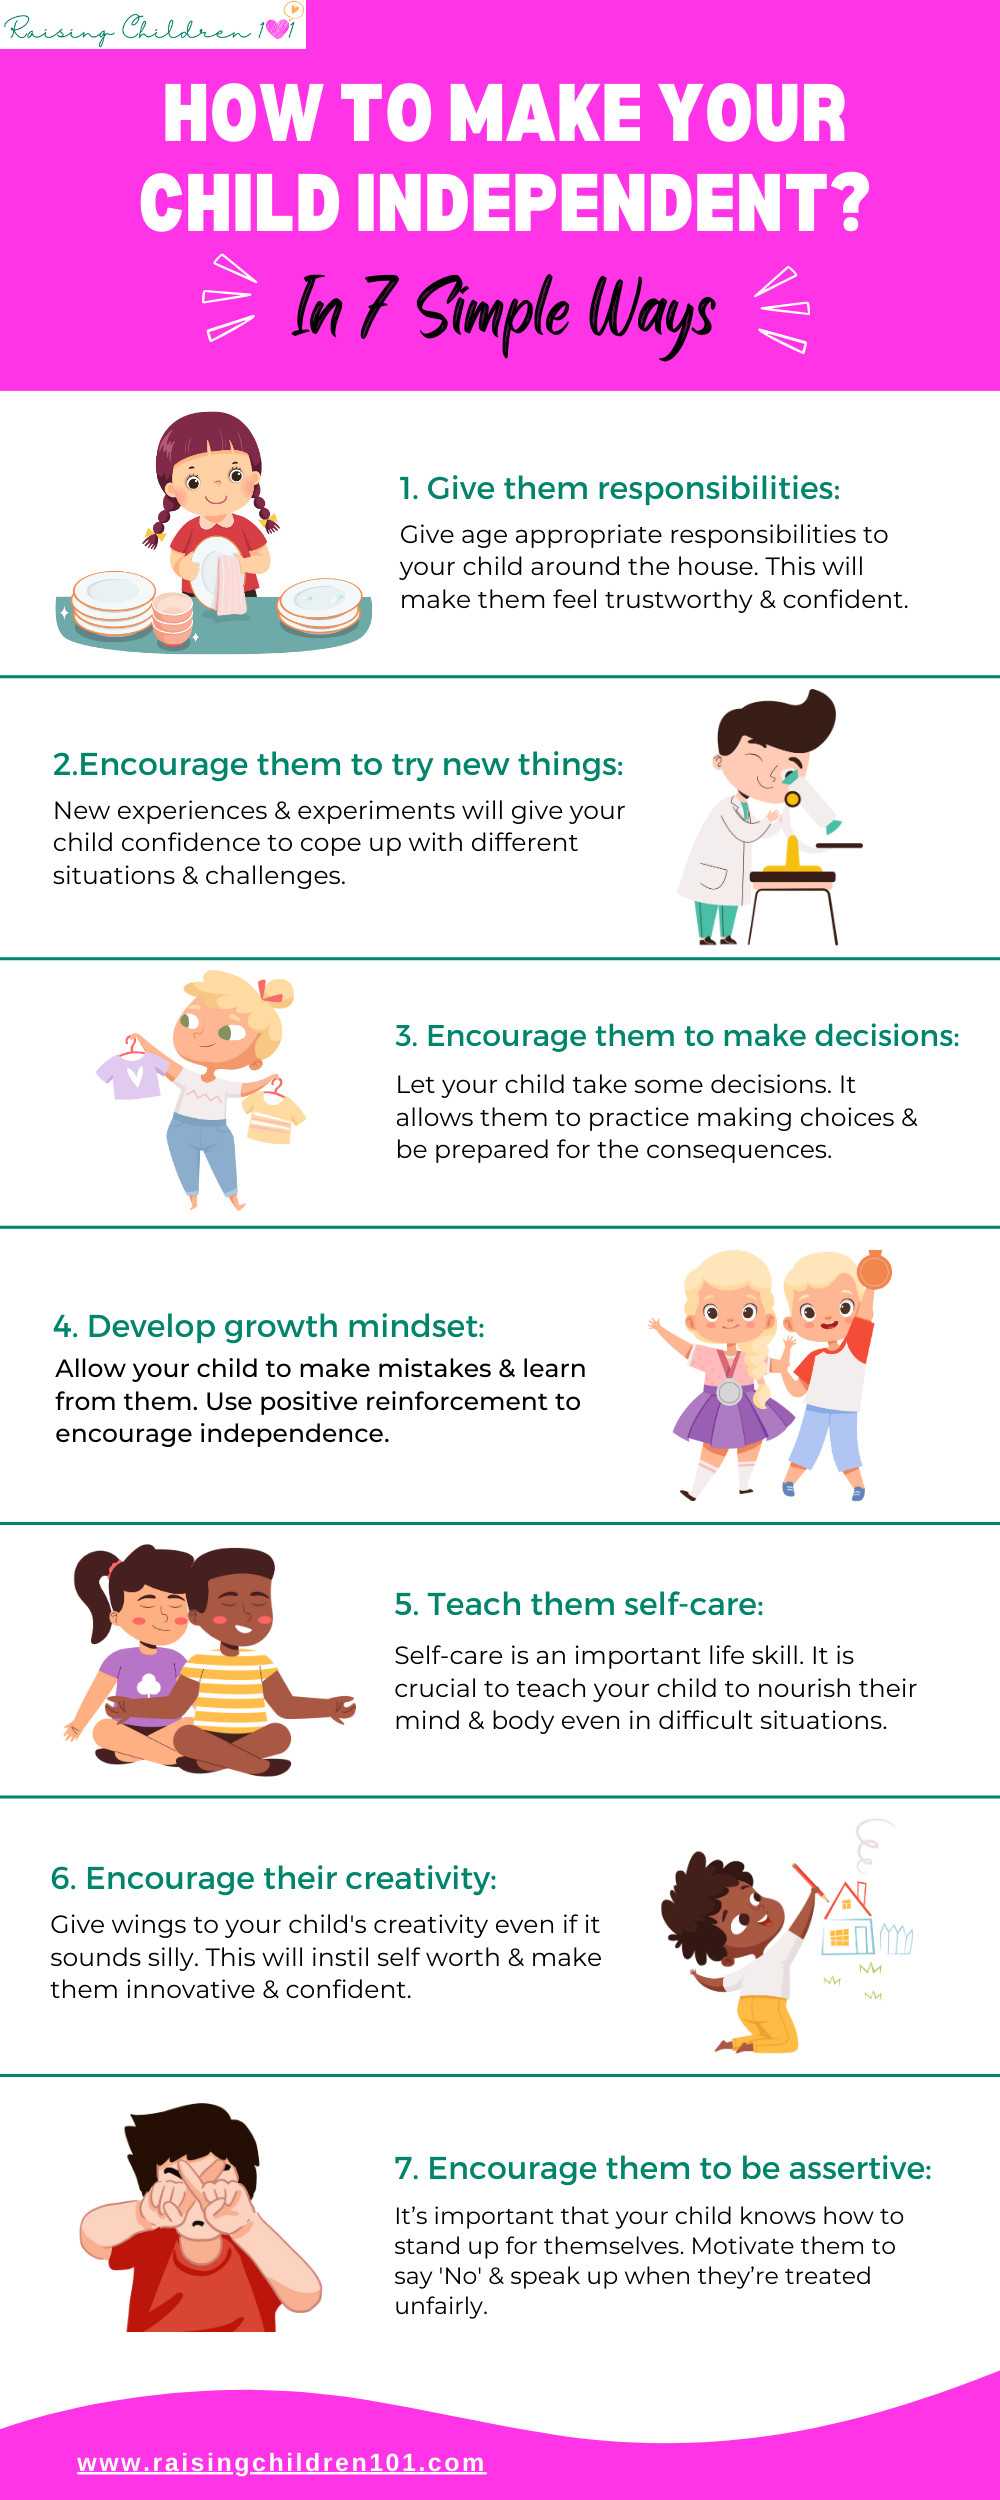 7 Ways to Make Your Child Independent